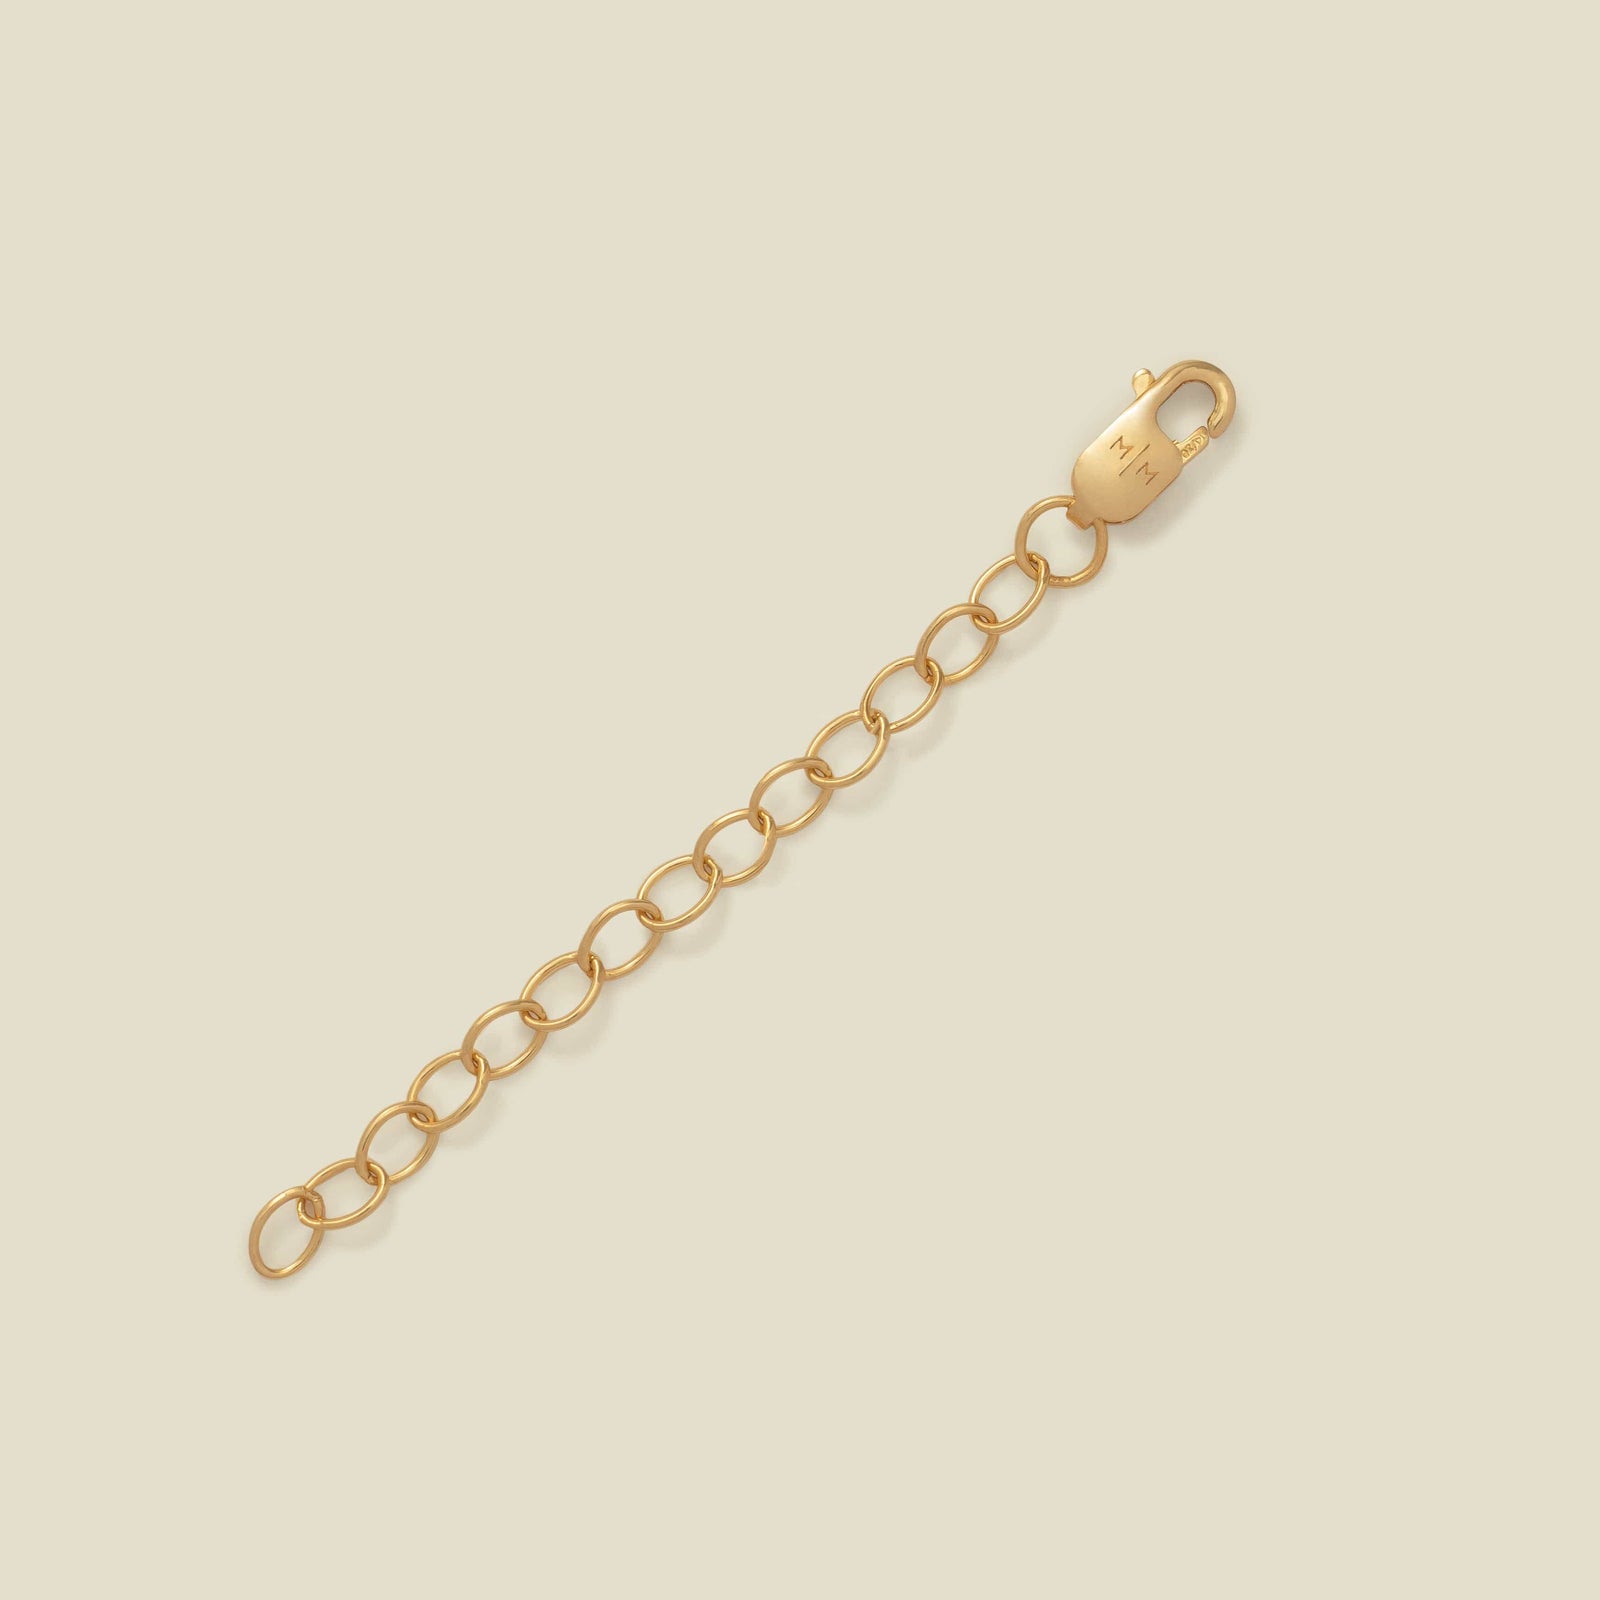 Detachable Chain Extender Add-on Gold Filled / 2.0" Add Ons